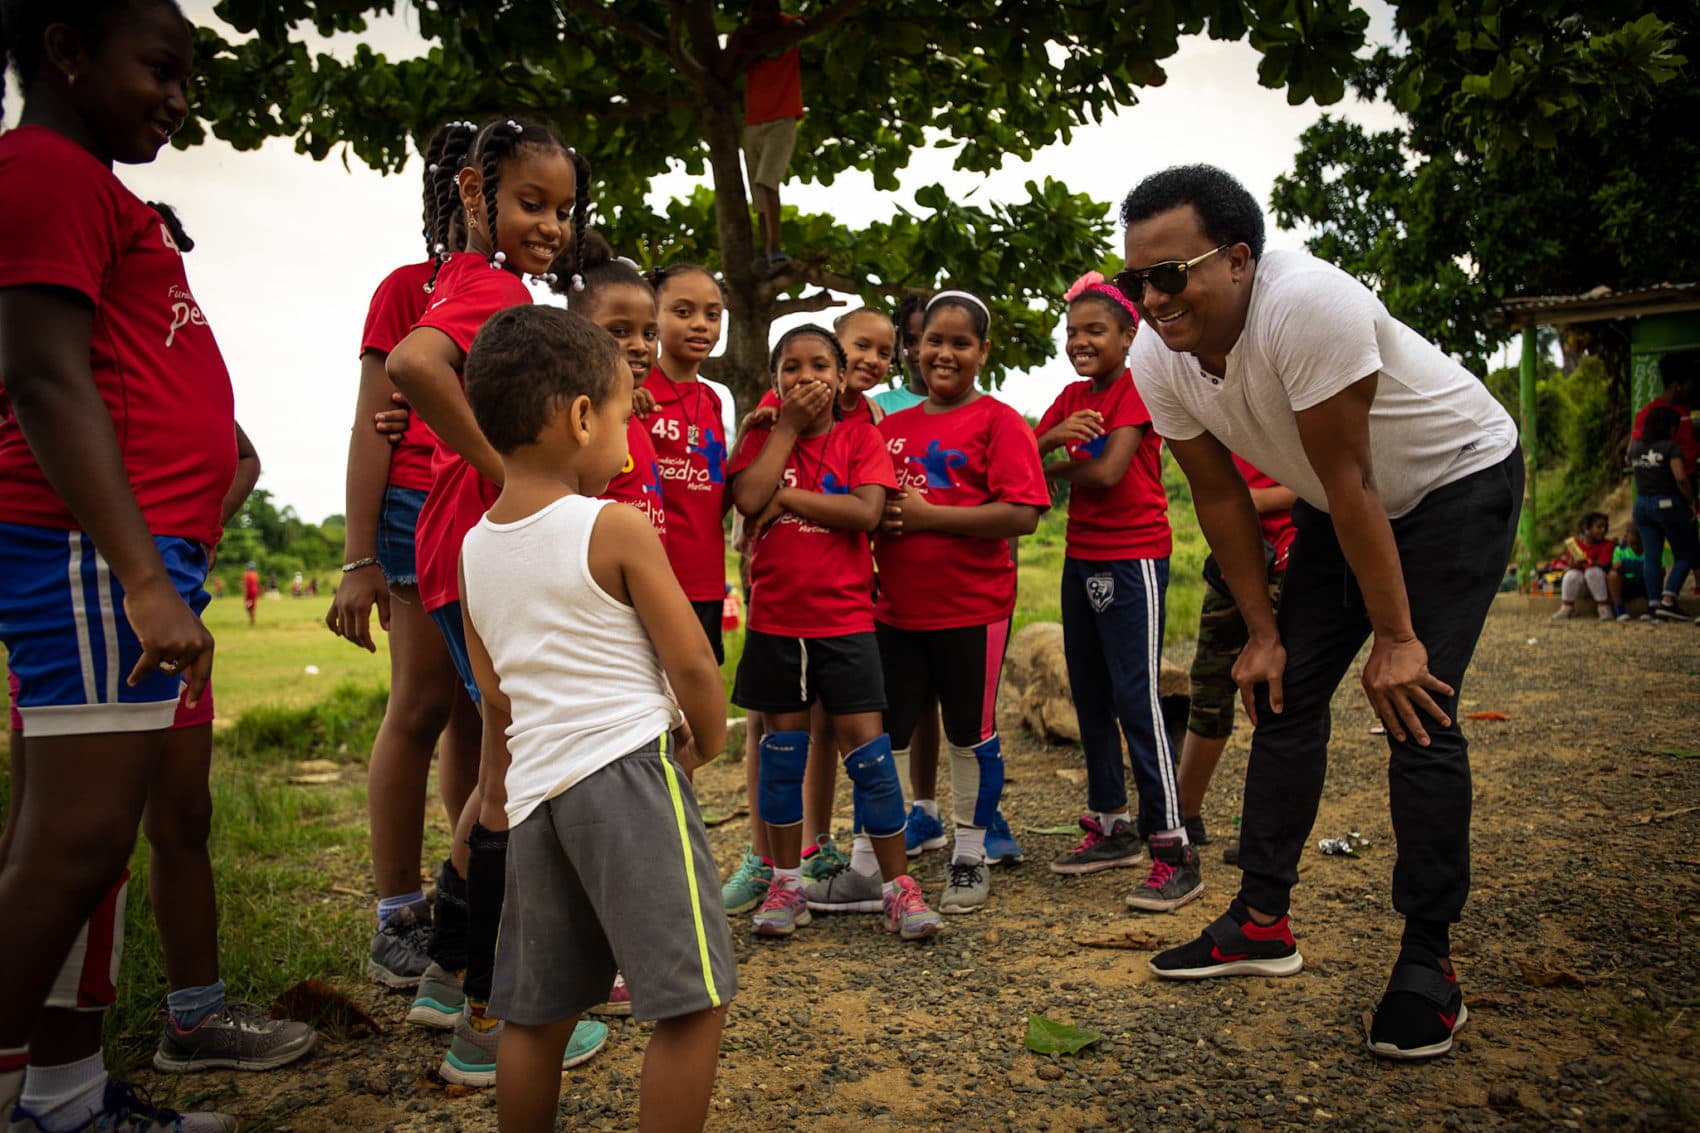 Pedro Martinez and wife go to bat for at-risk youths, Sports